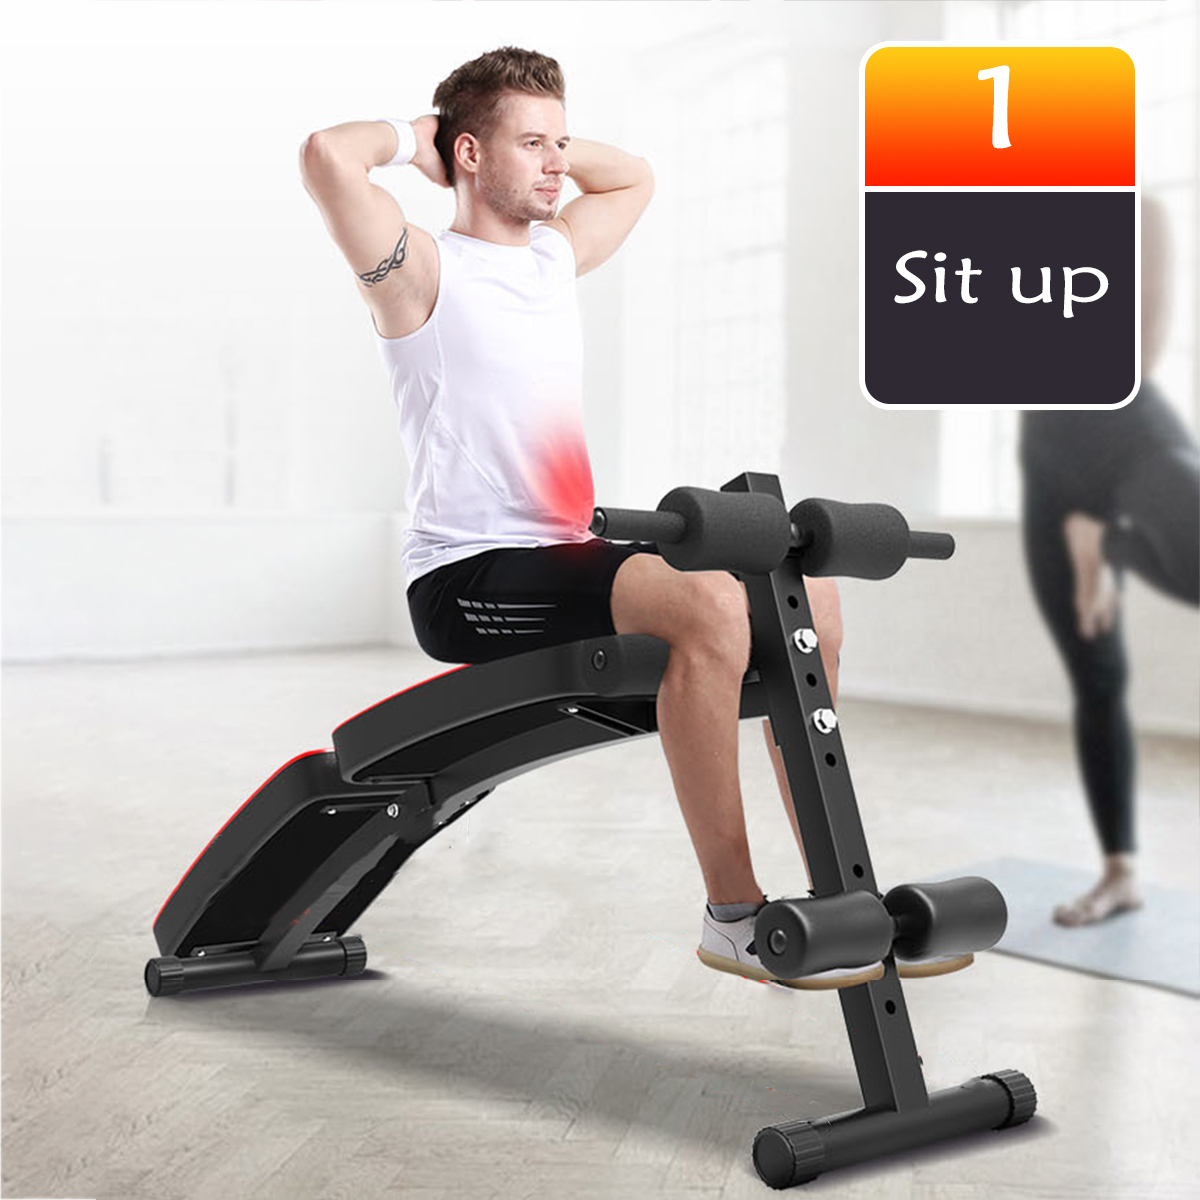 Adjustable-Sit-up-Bench-Crunch-Board--Abdominal-Fitness-Home-Gym-Exercise-1691961-7